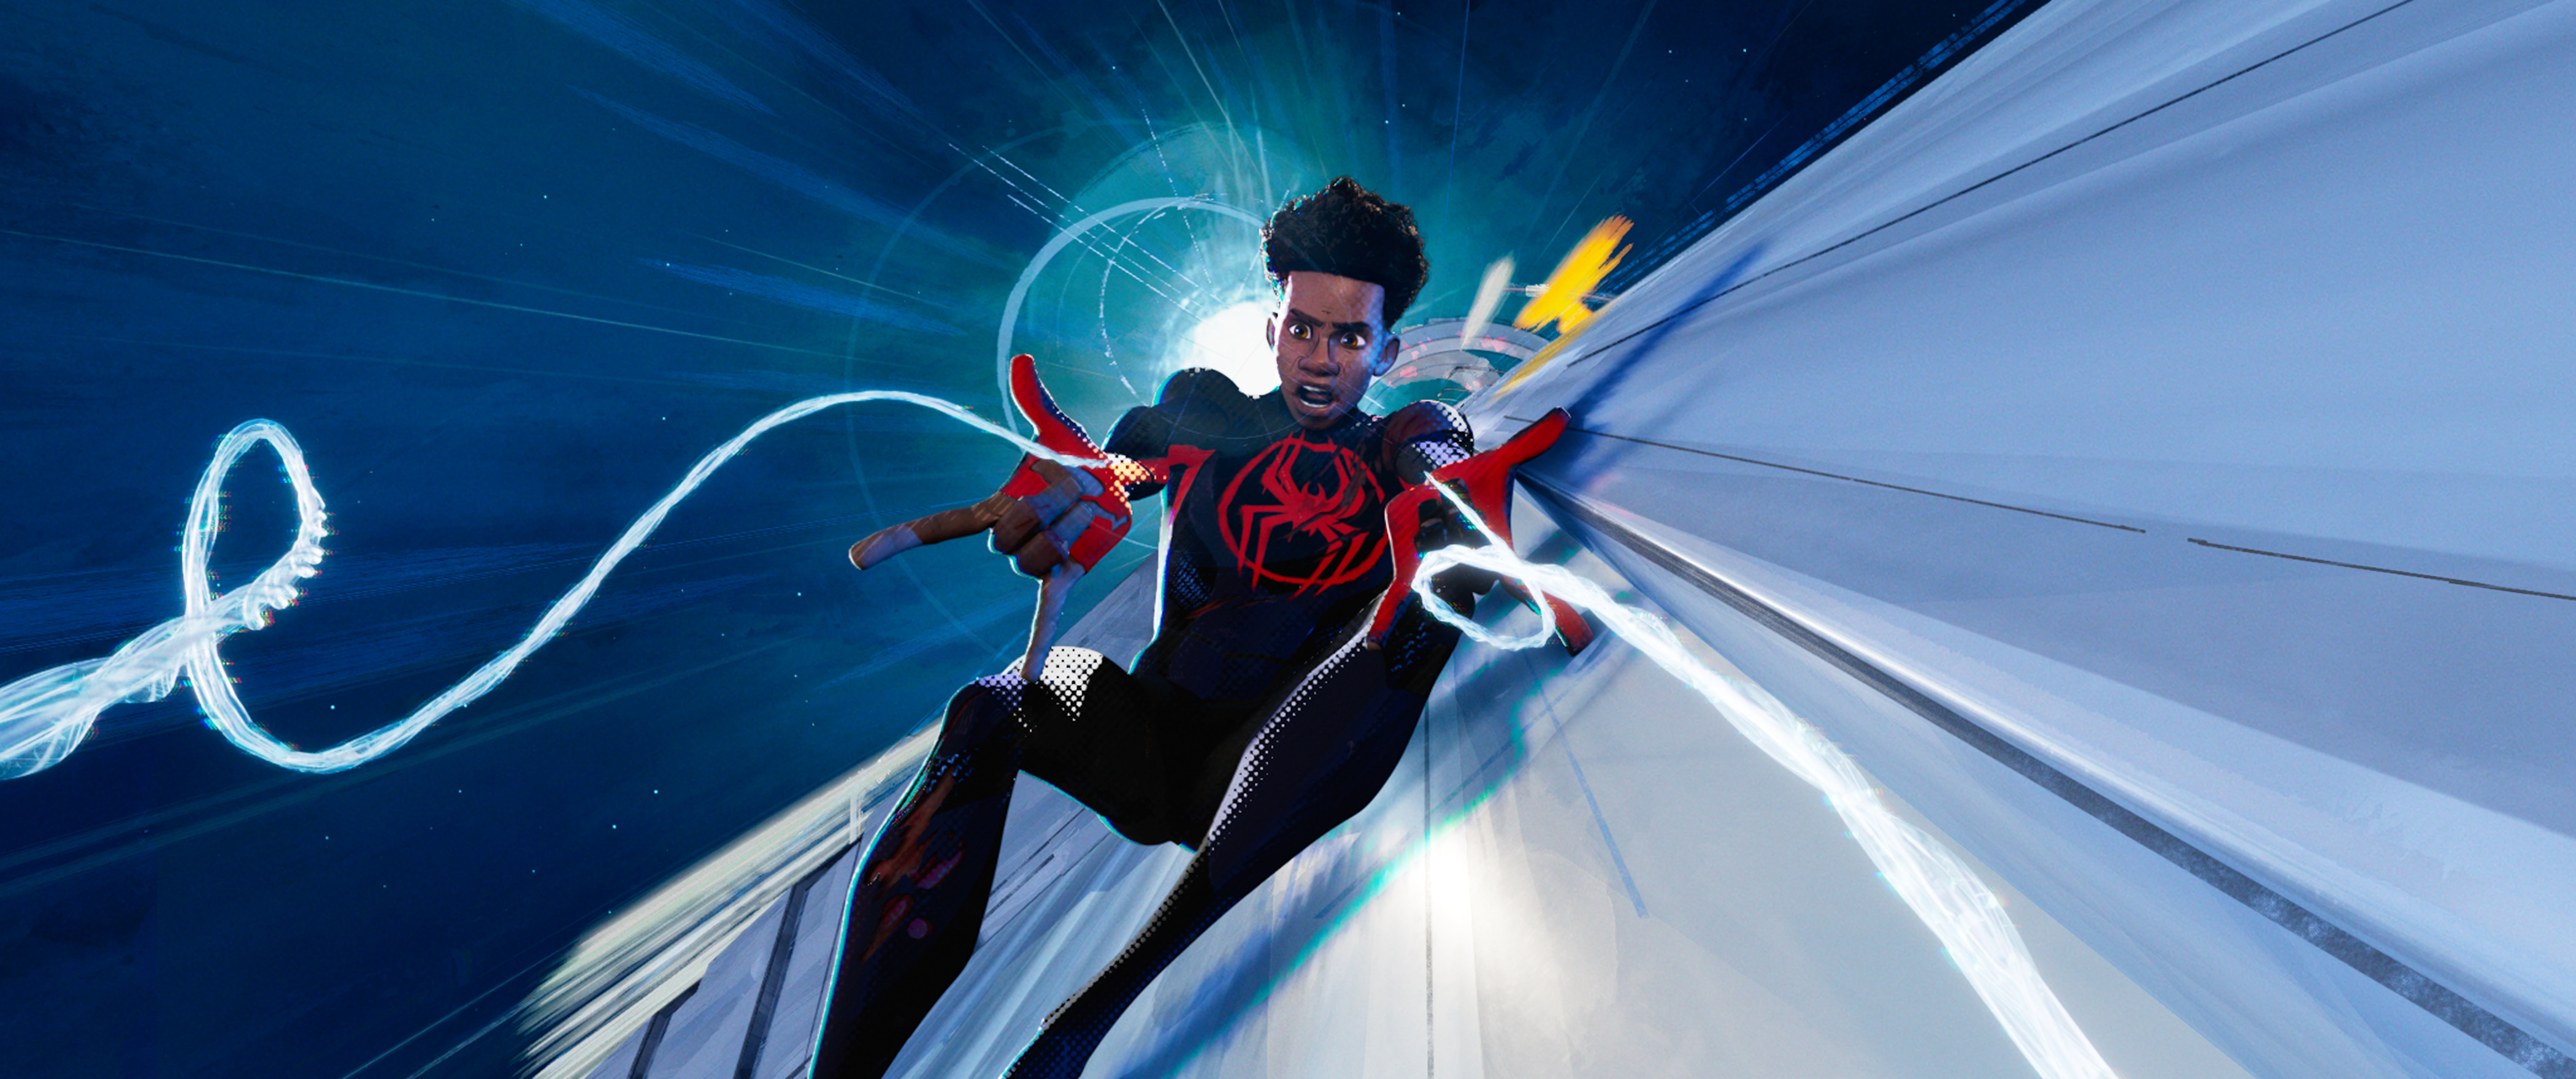 Miles Morales in his suit, without his mask, falling down a sleek white building and using his web shooters to catch onto something. 